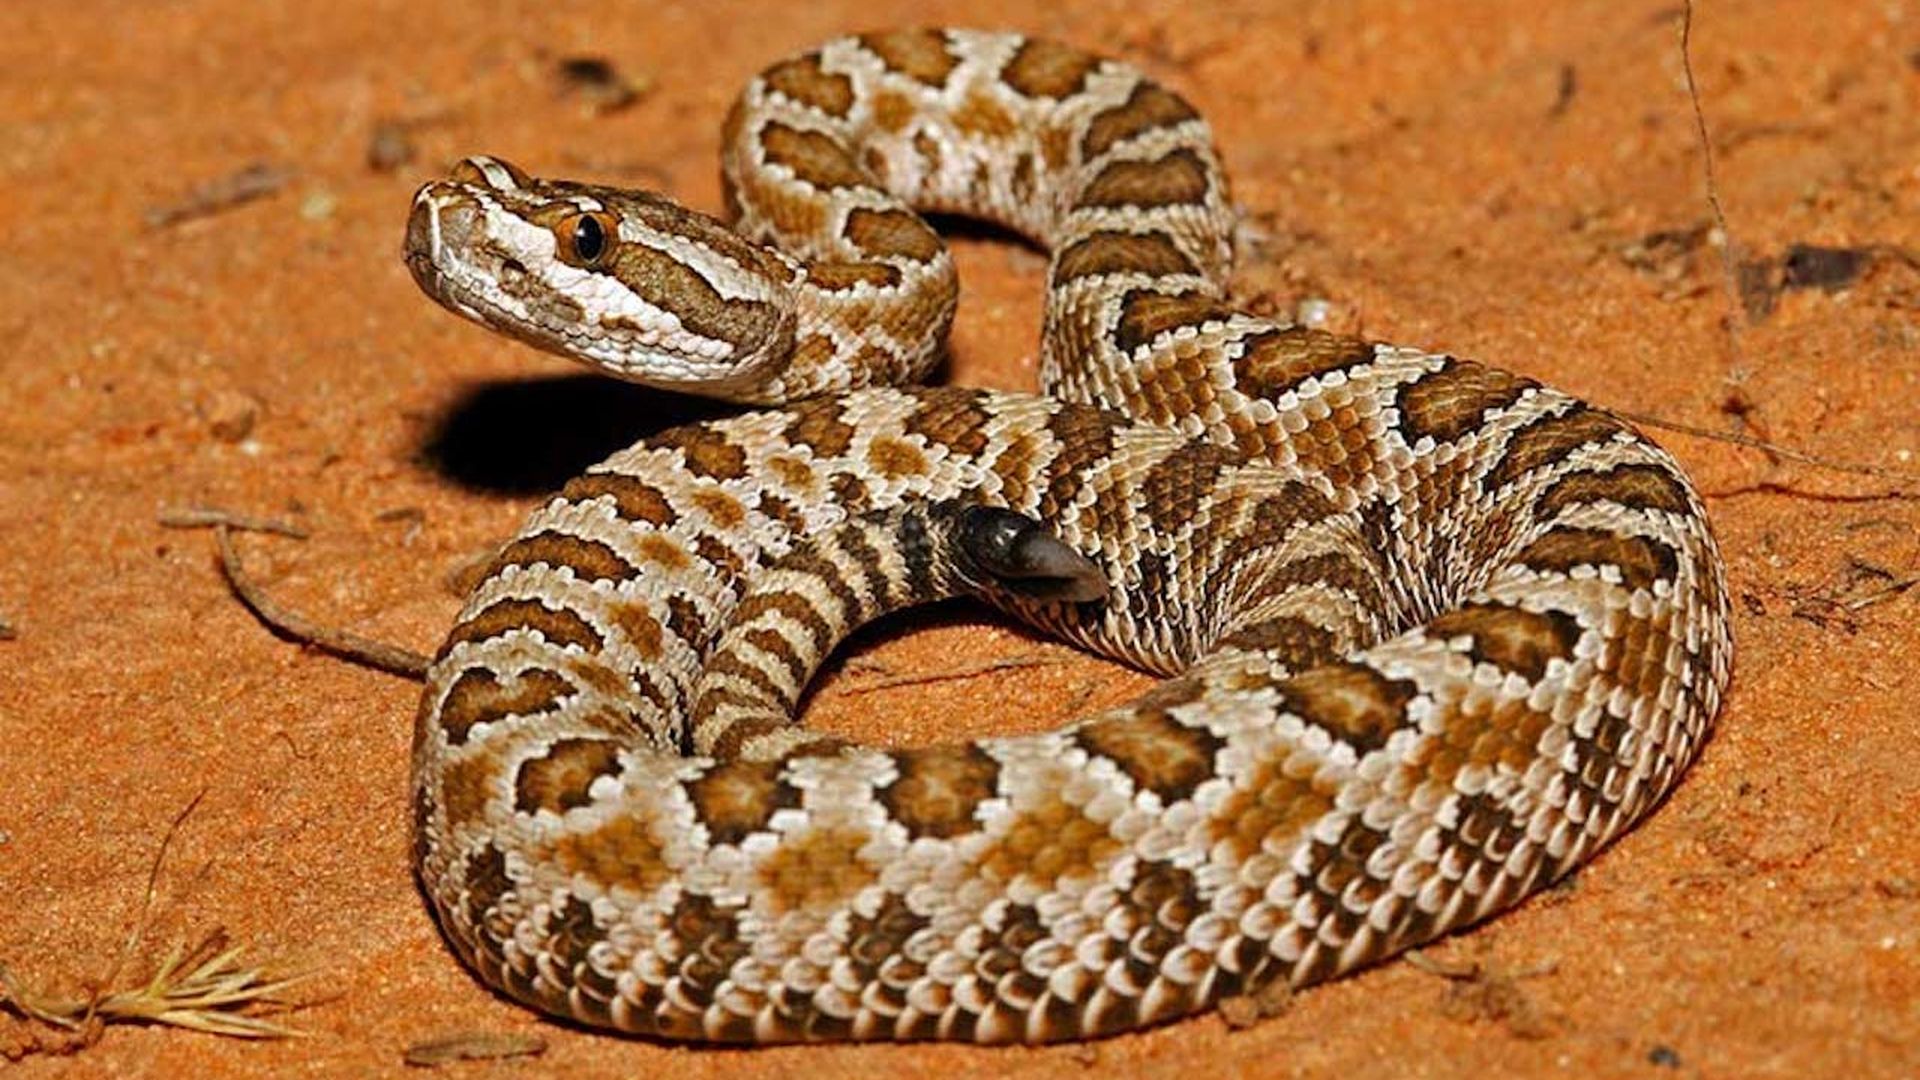 A rattlesnake on the ground